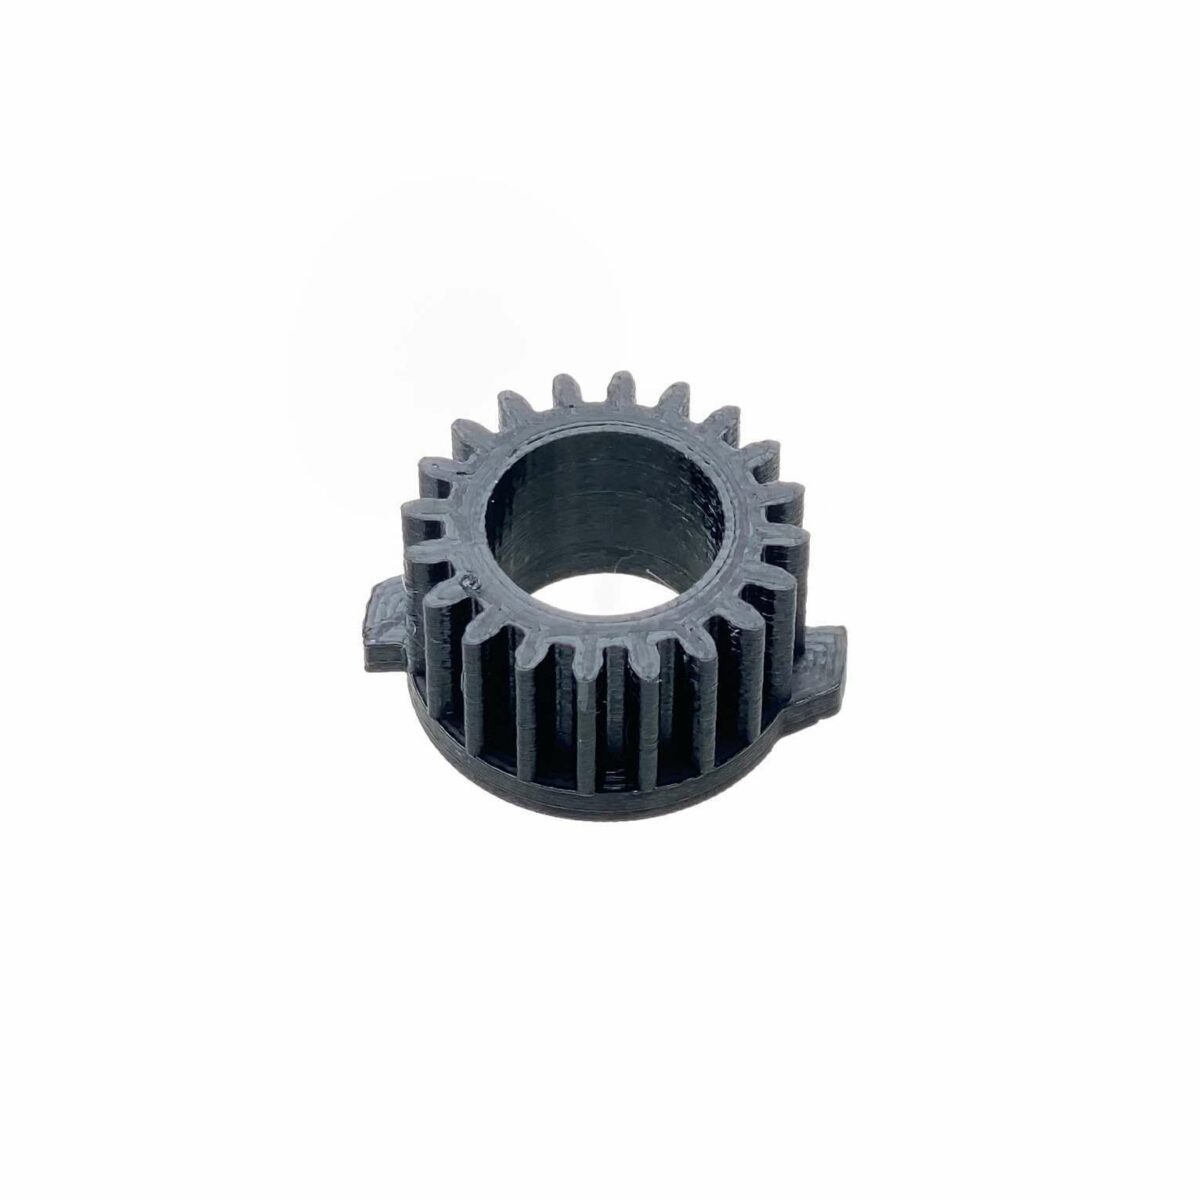 Sony PS-3300, 3700 Replacement Spindle Reject Gear 1